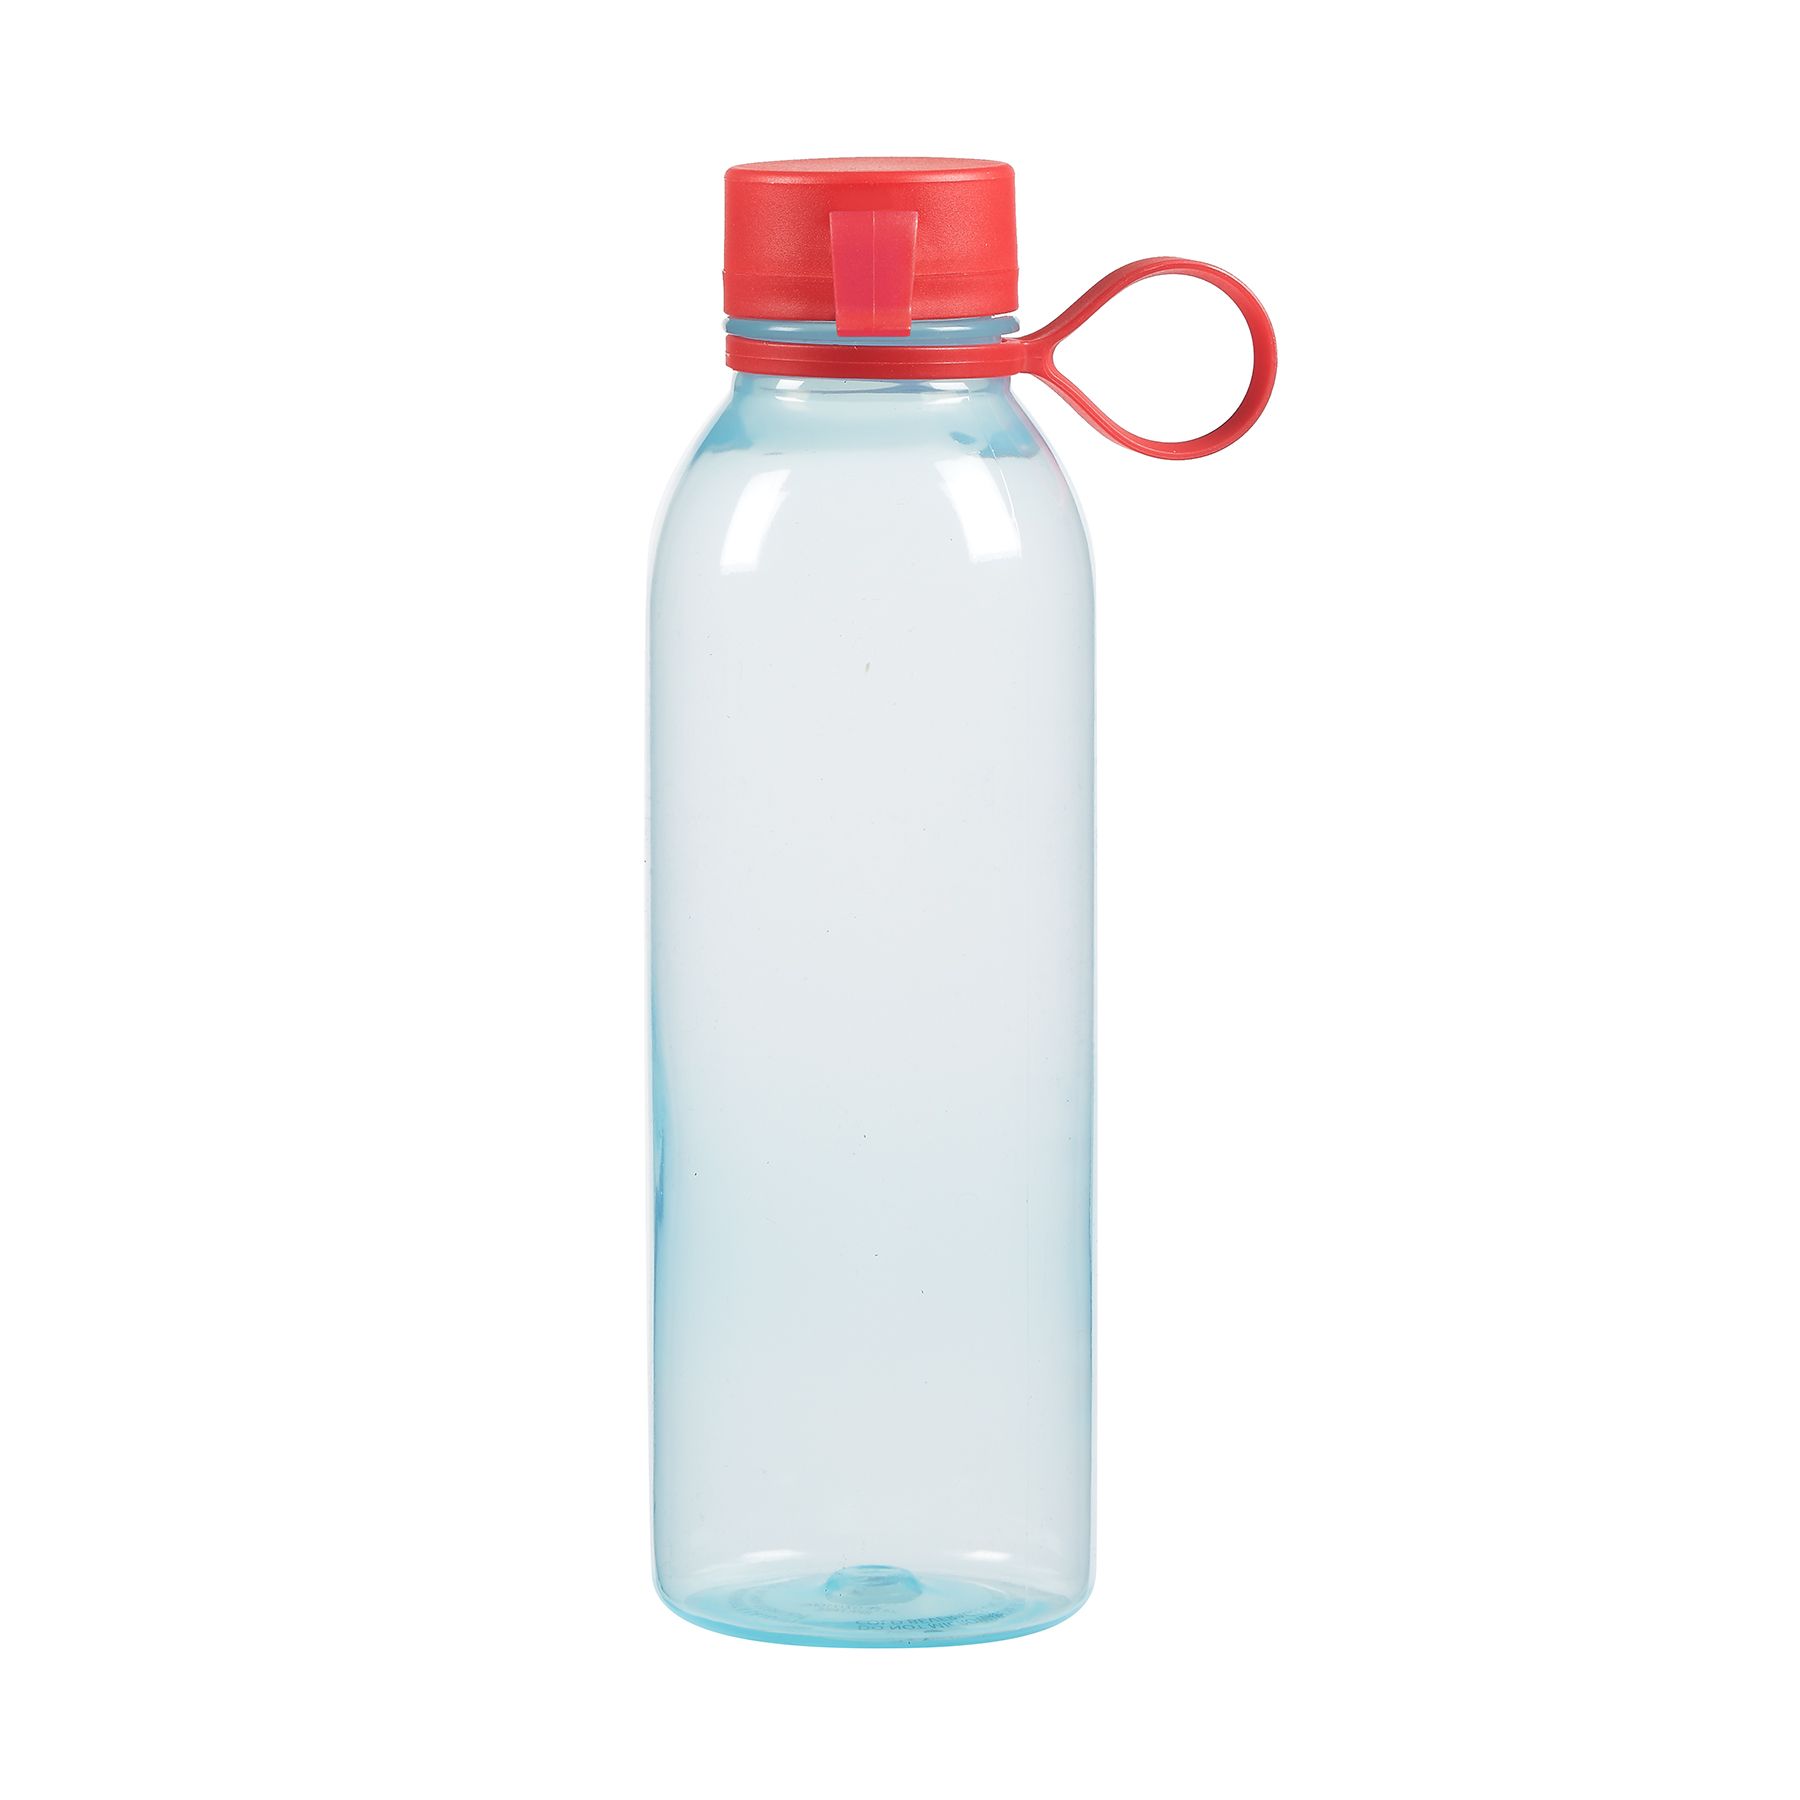 Wholesale Plastic Water Bottle- 24oz- Red/Clear CLEAR/RED TOP